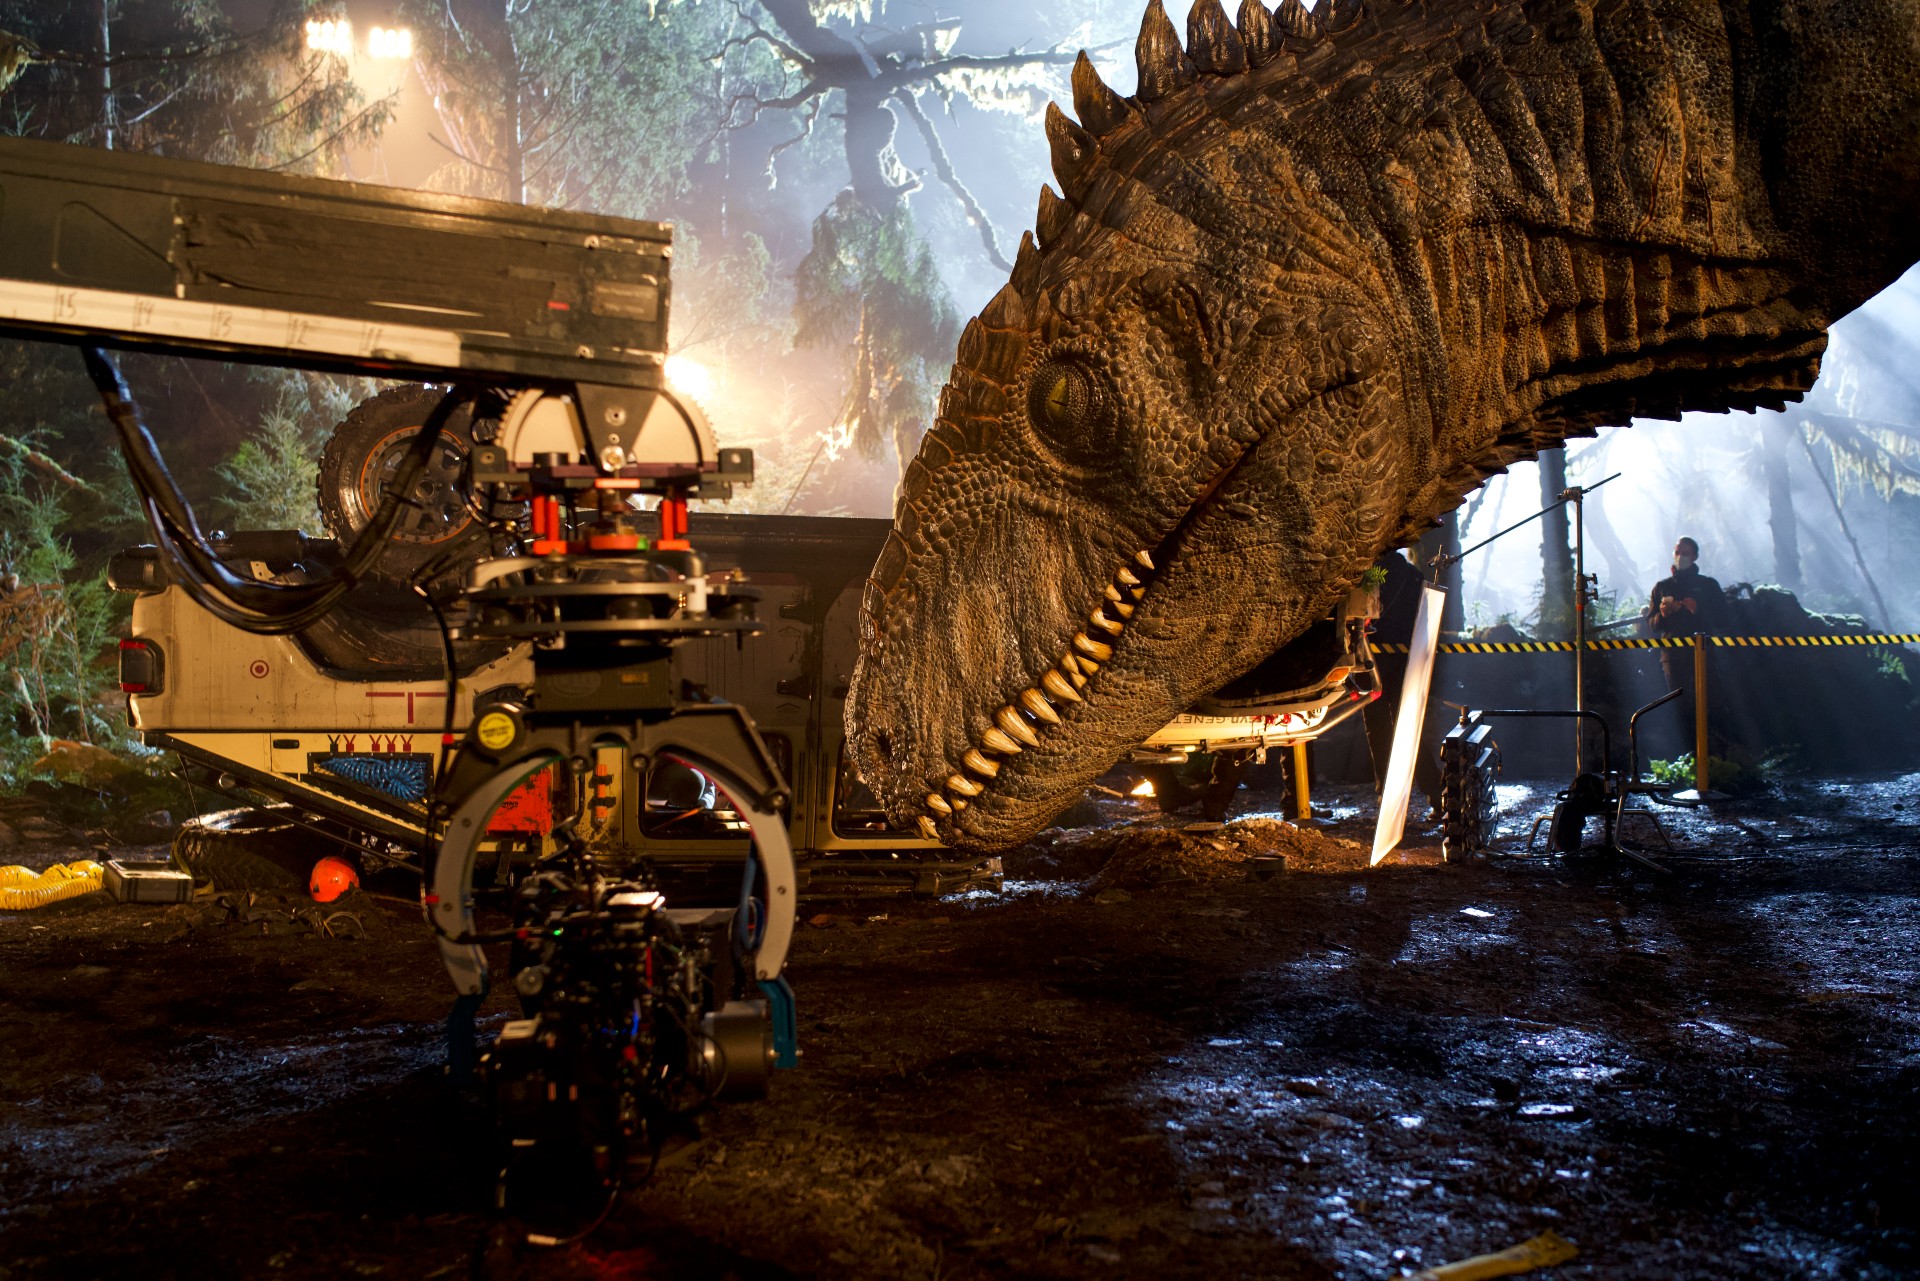 A chat with Jurassic World's live-action dinosaur wrangler | Digital Trends